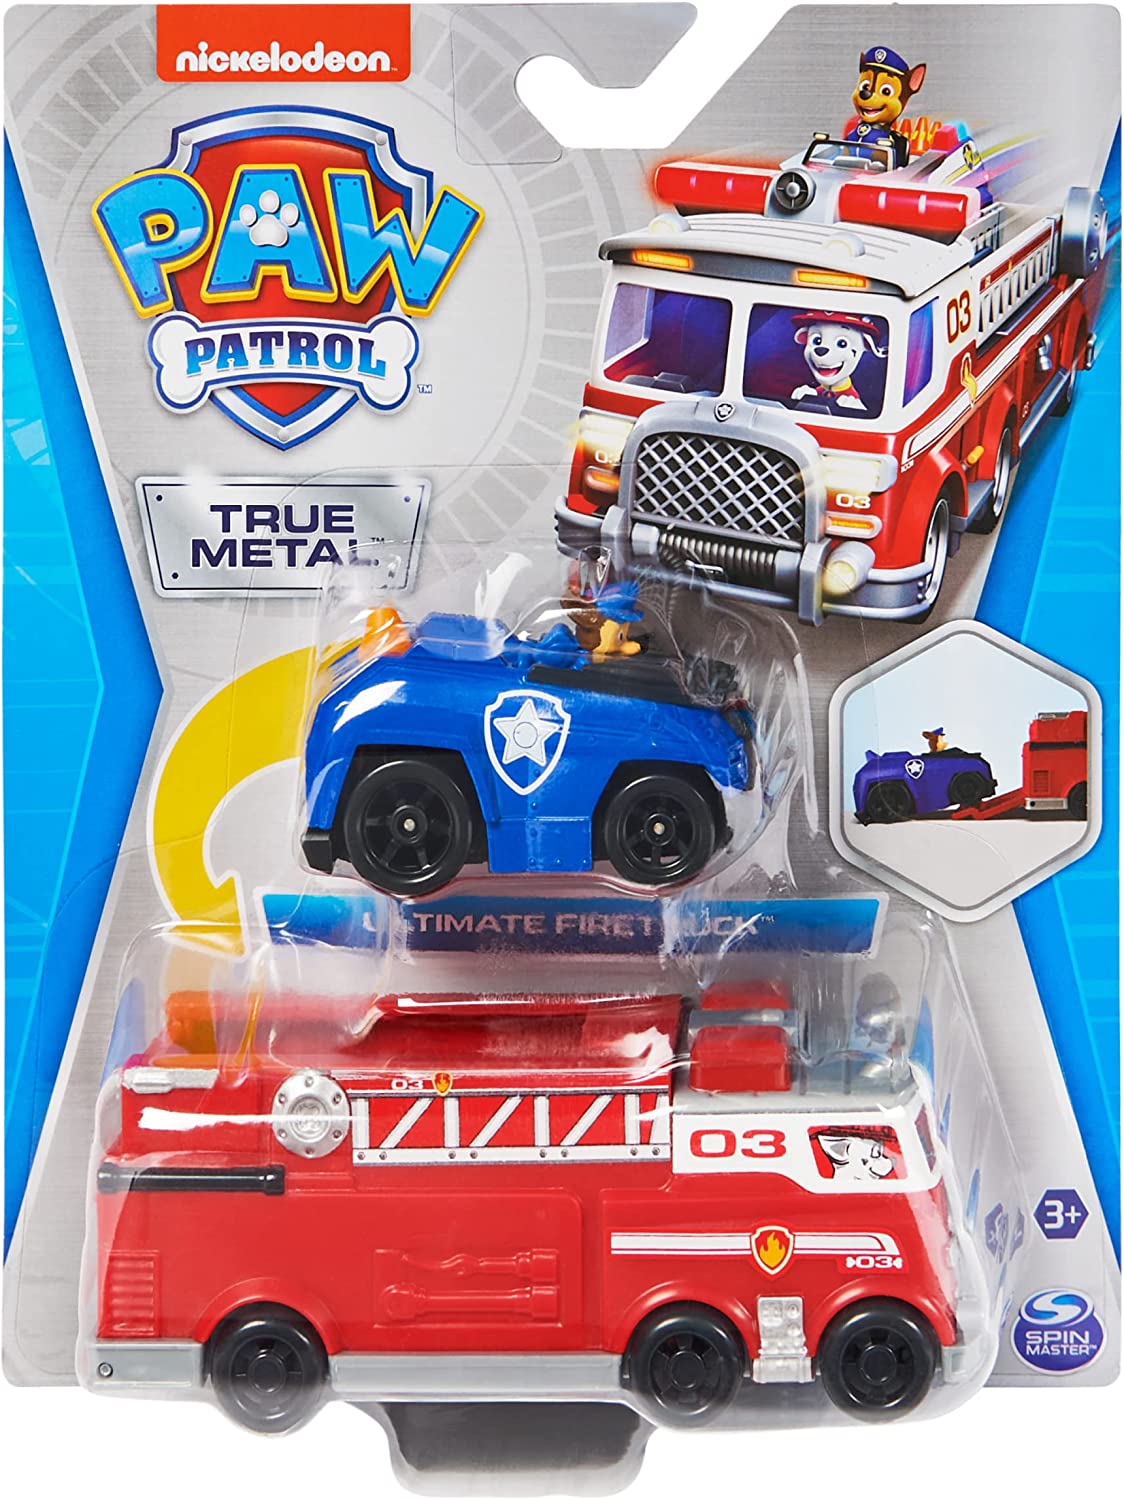 True Metal PAW Patroller Die-Cast Team Vehicle with 1:55 Scale Ryder ATV Toy Car, Kids Toys for Ages 3 and up, (Set of 2)